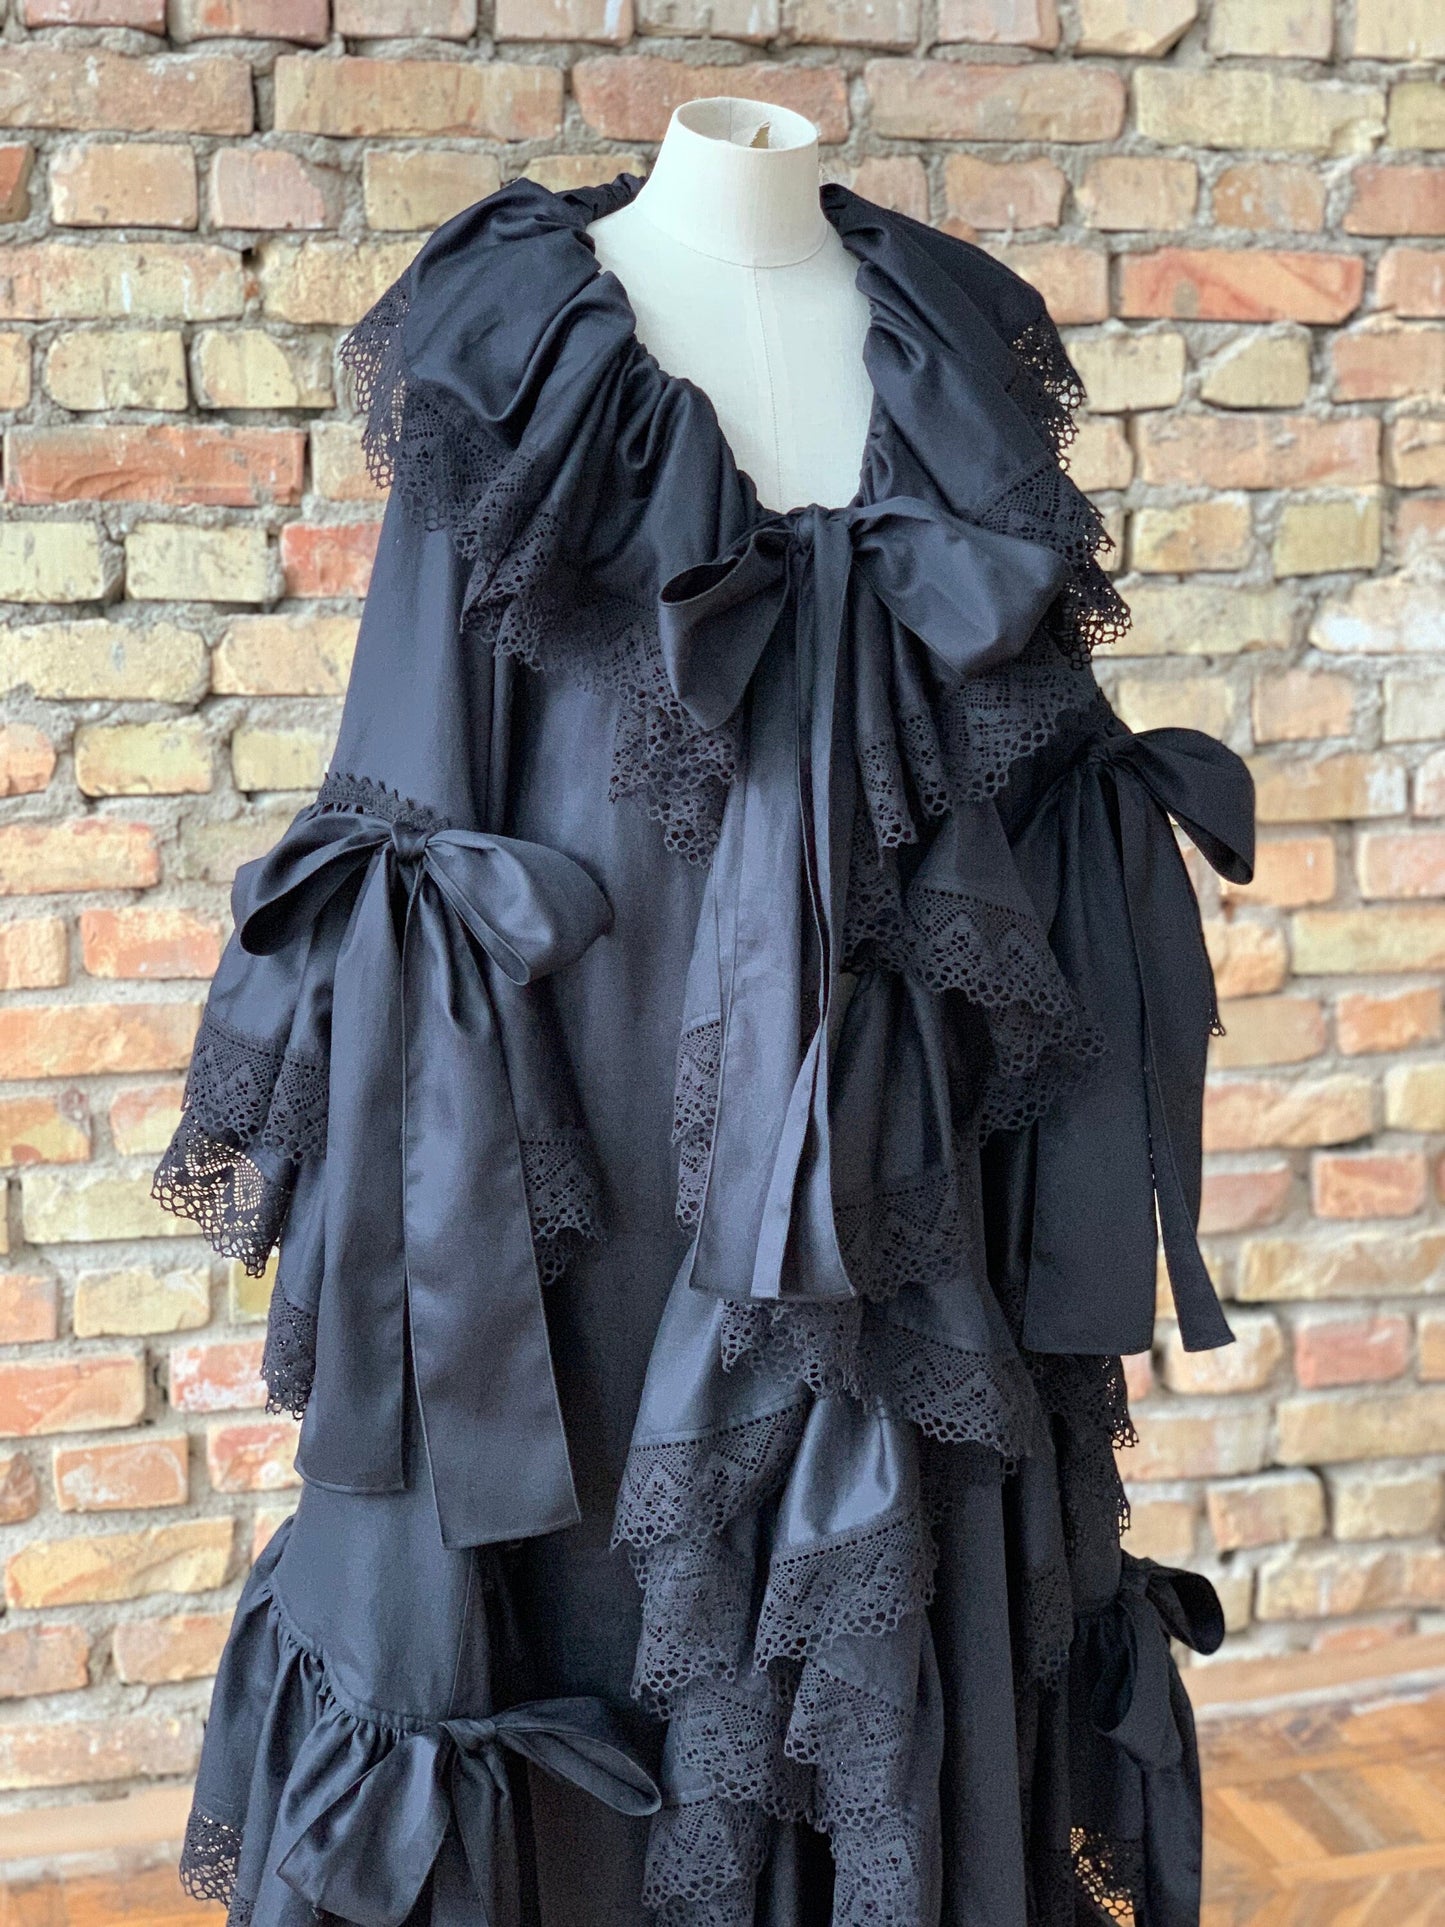 Queen Isabella - Rococo Inspired Negligee in Black